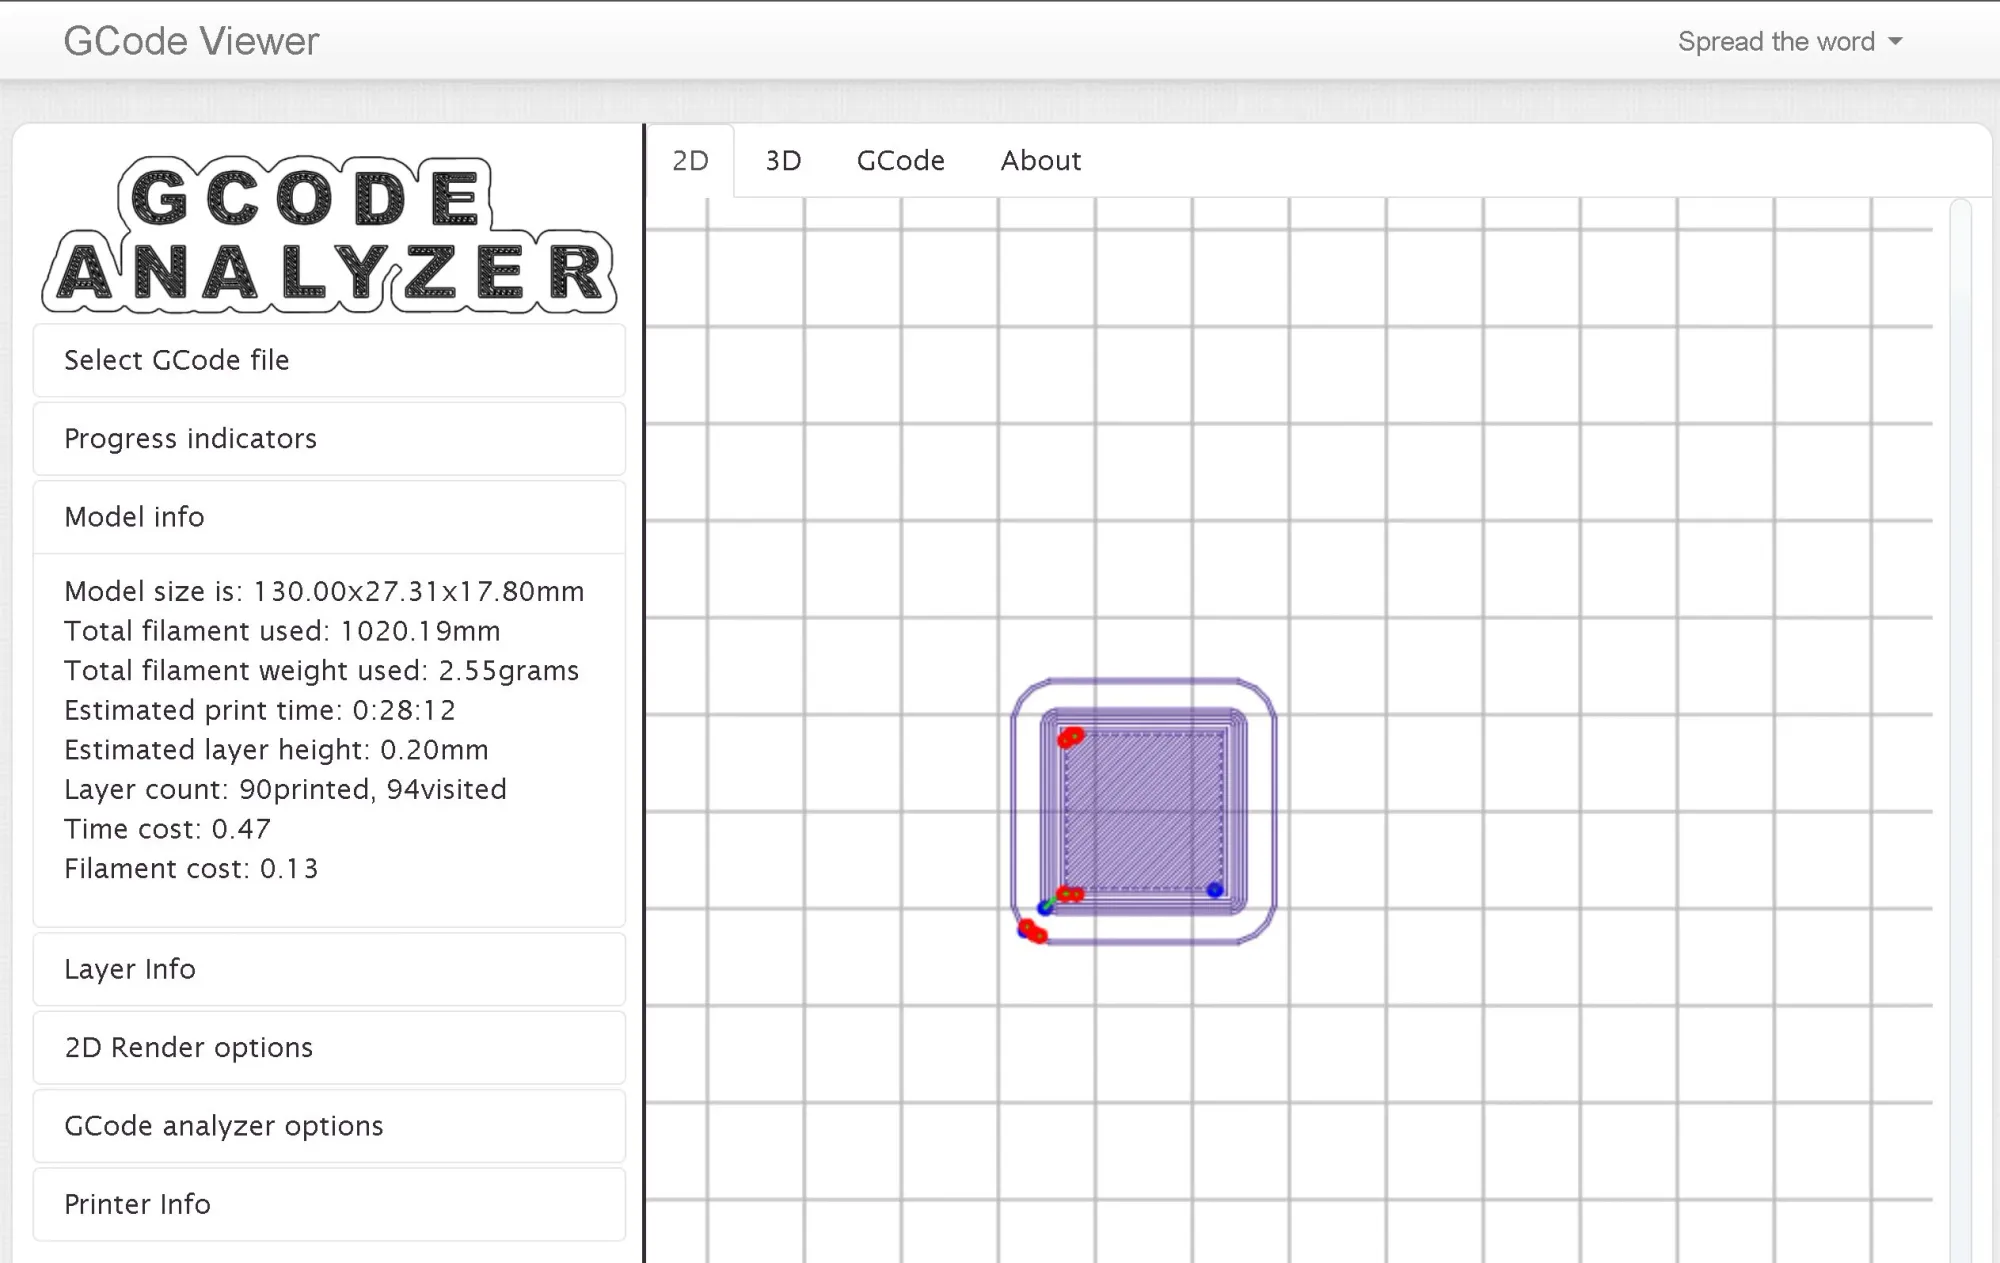 Screenshot of G-Code Viewer showing the Model Info section for a test G-Code file of a 18 mm cube